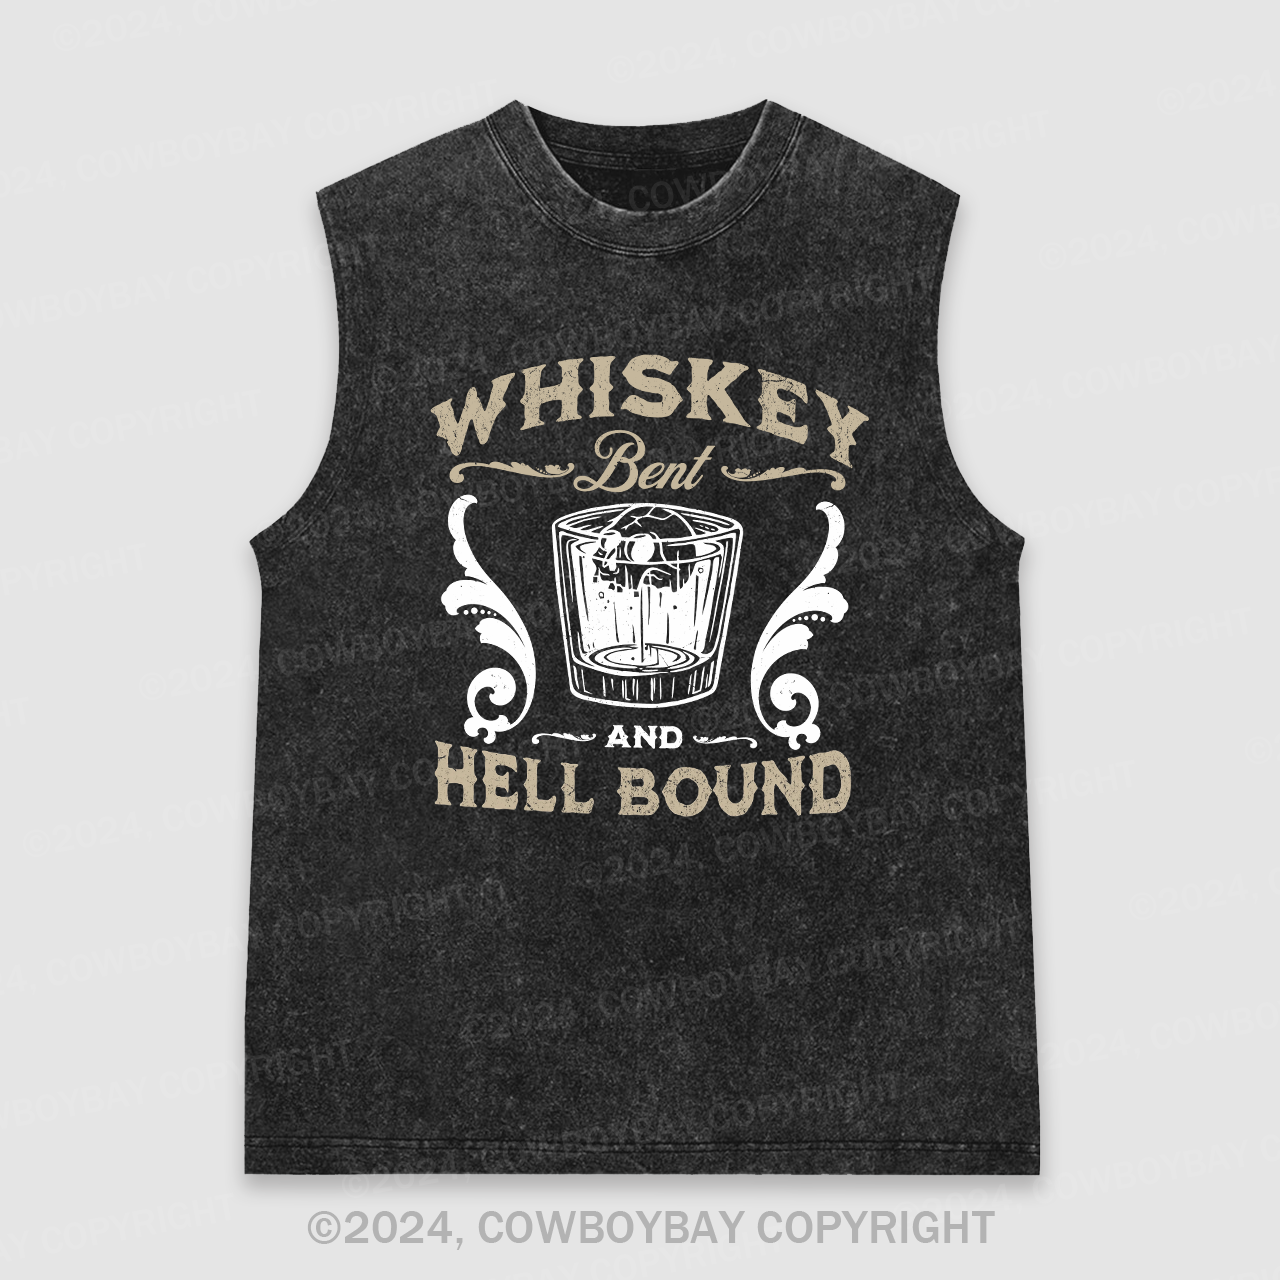 Whiskey Bent & Hell Bound Washed Tanks